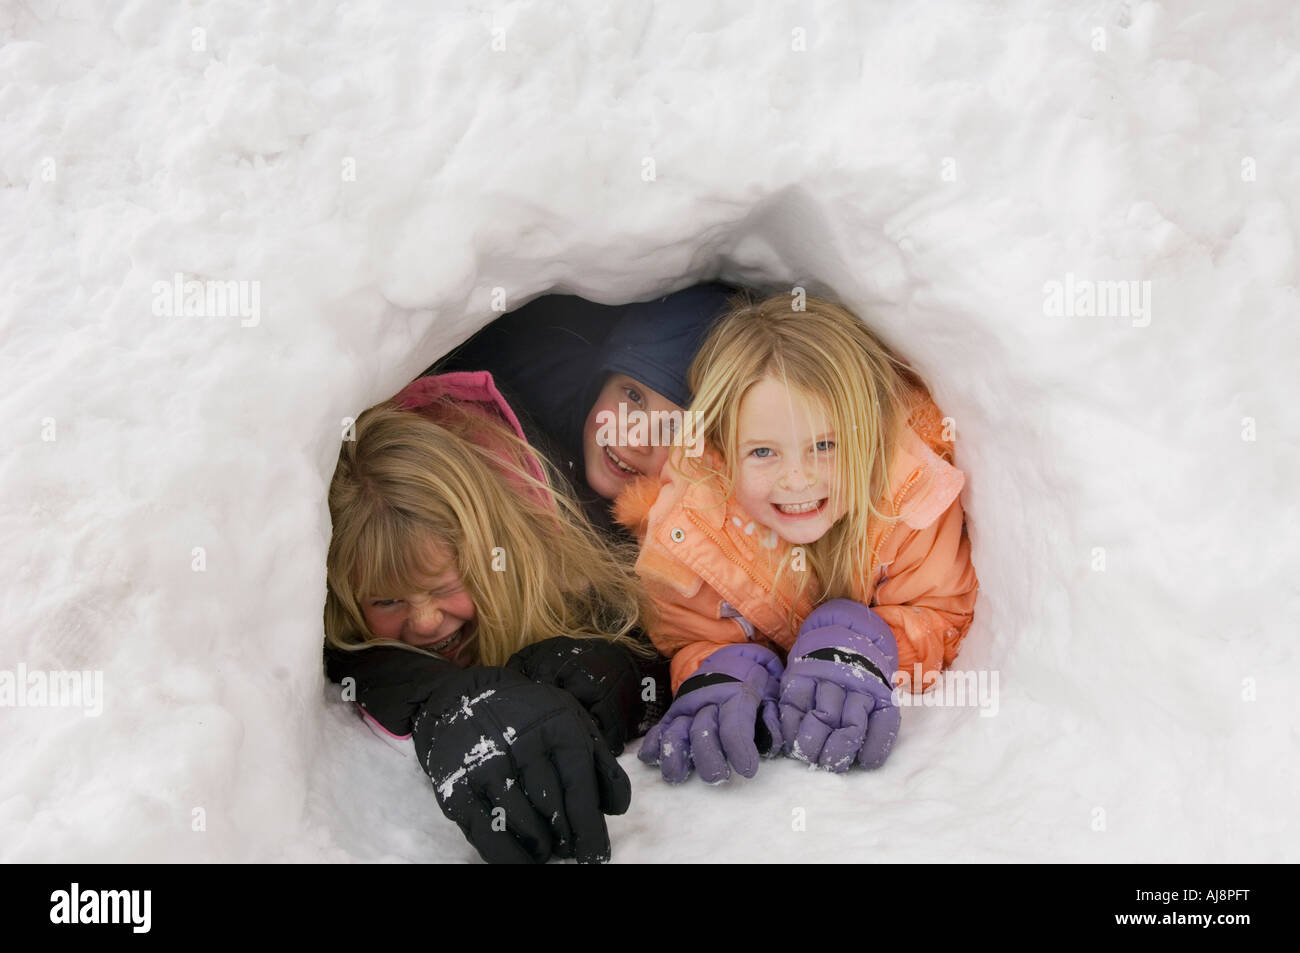 snow cave shelter